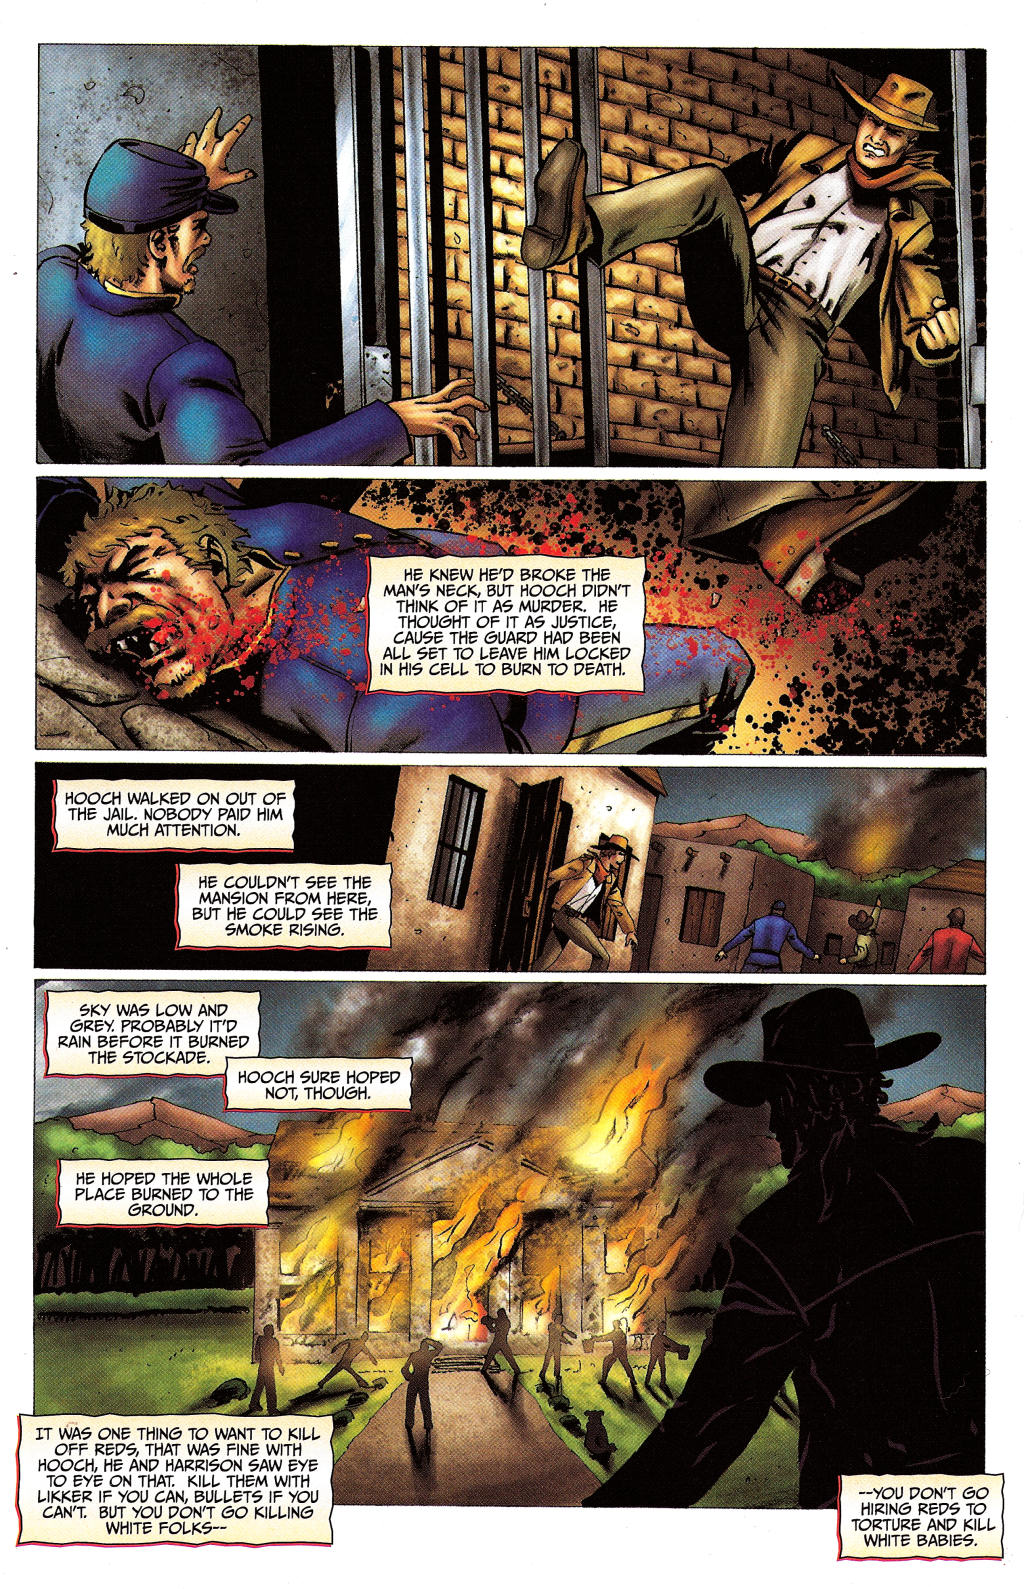 Red Prophet: The Tales of Alvin Maker issue 4 - Page 20